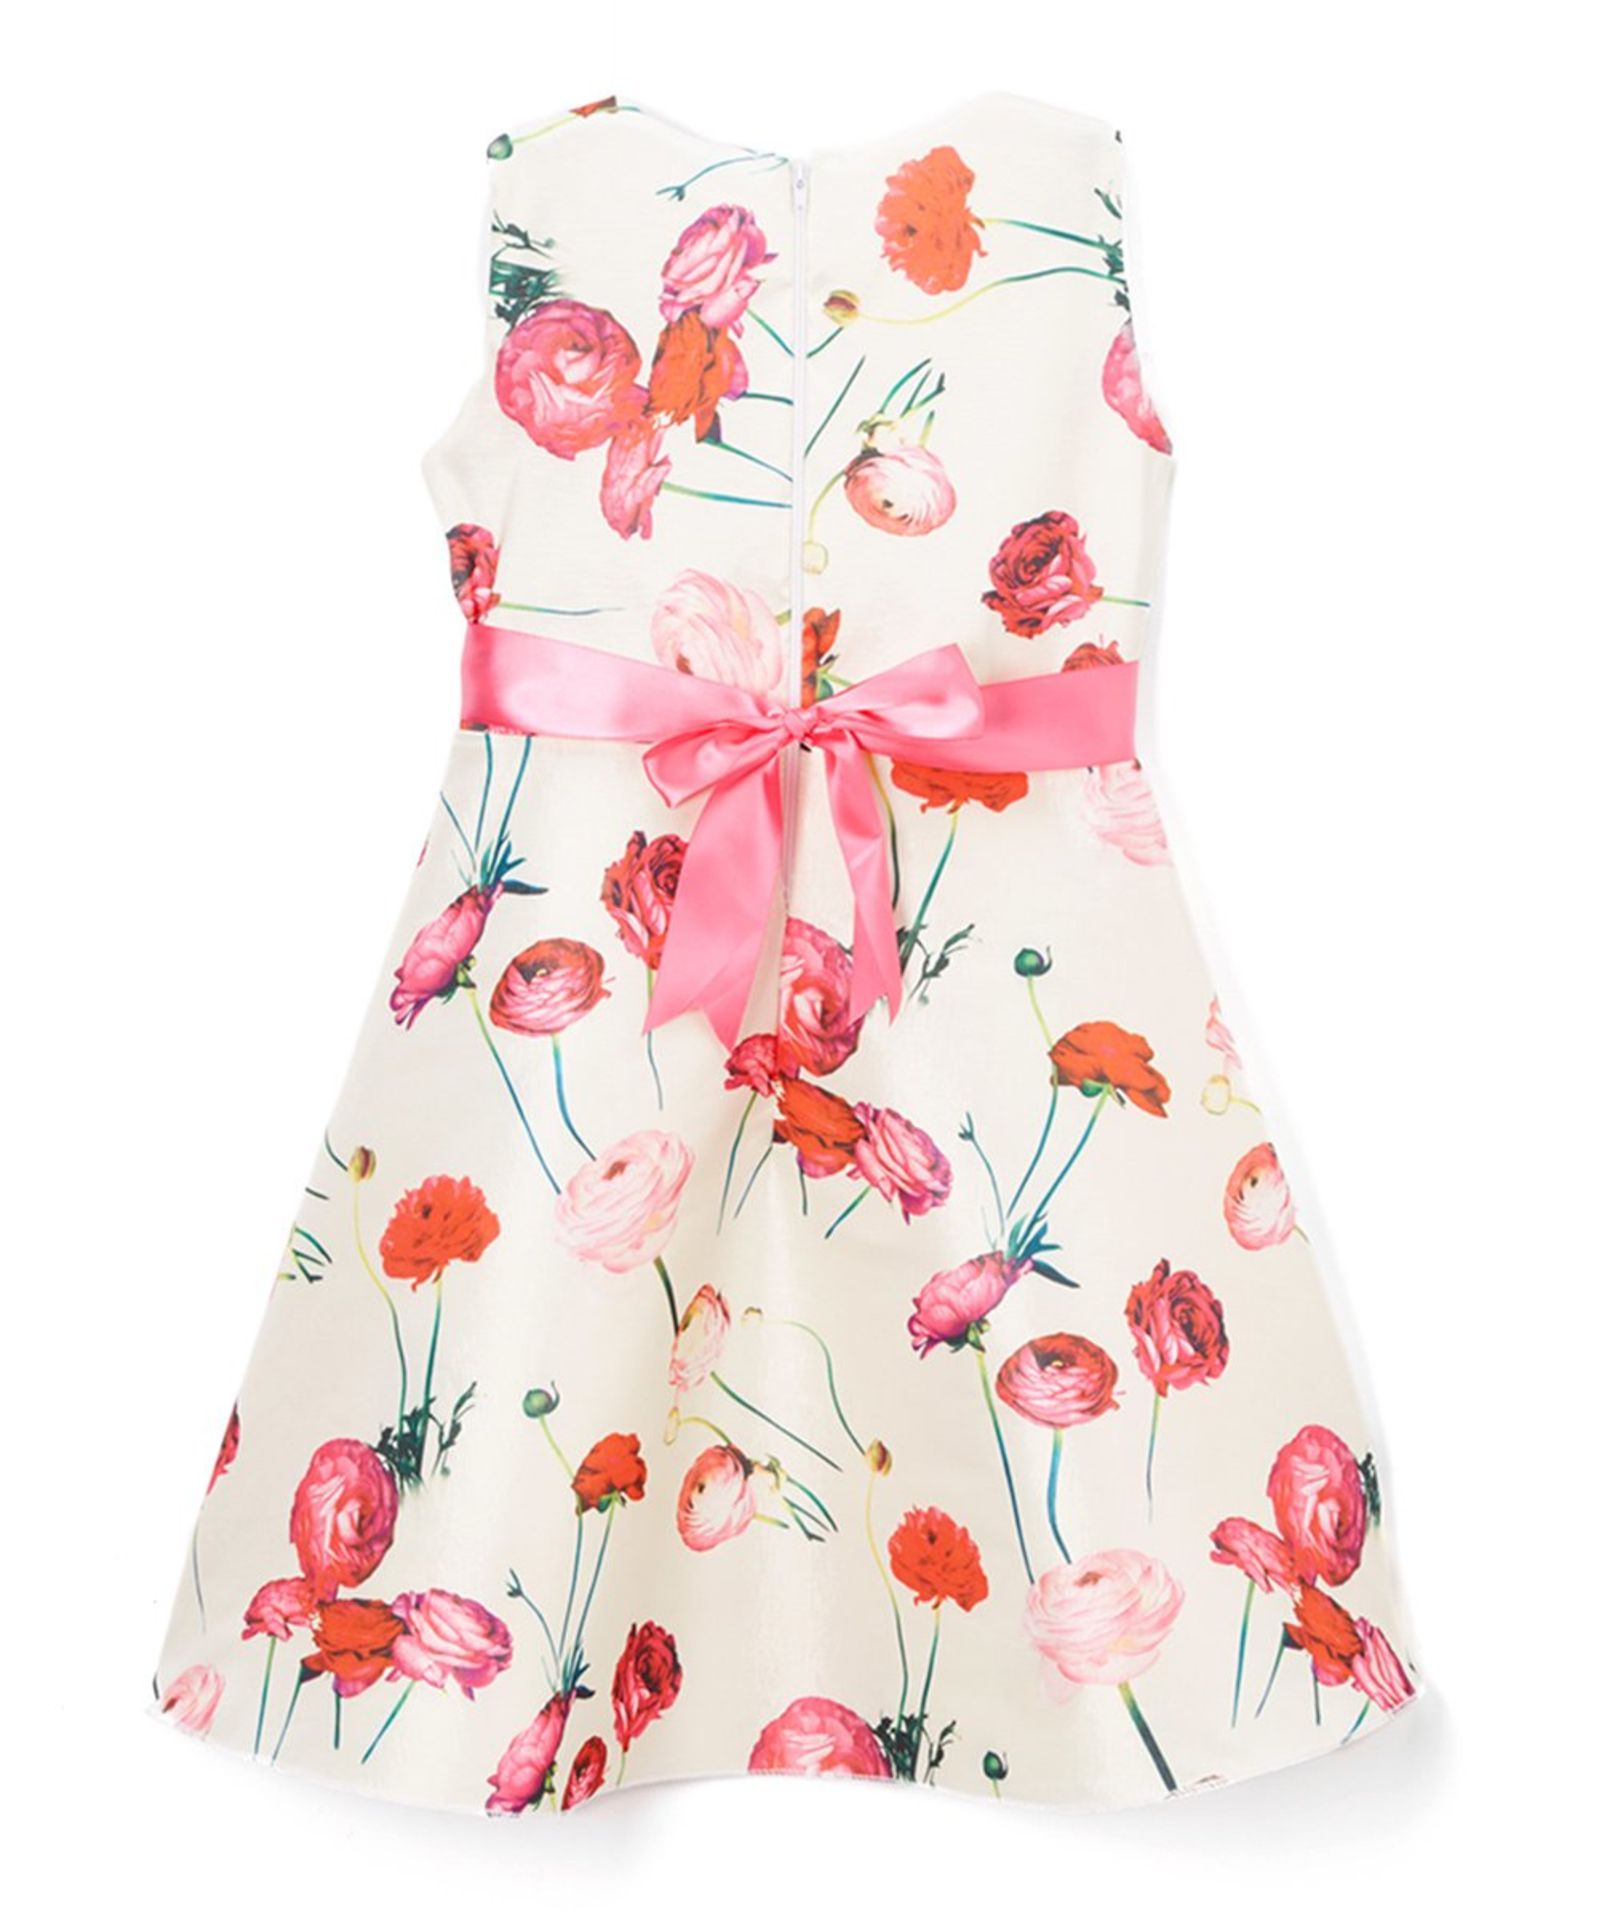 Light Yellow Floral A-Line Dress - Toddler & Girls - Image 2 of 2